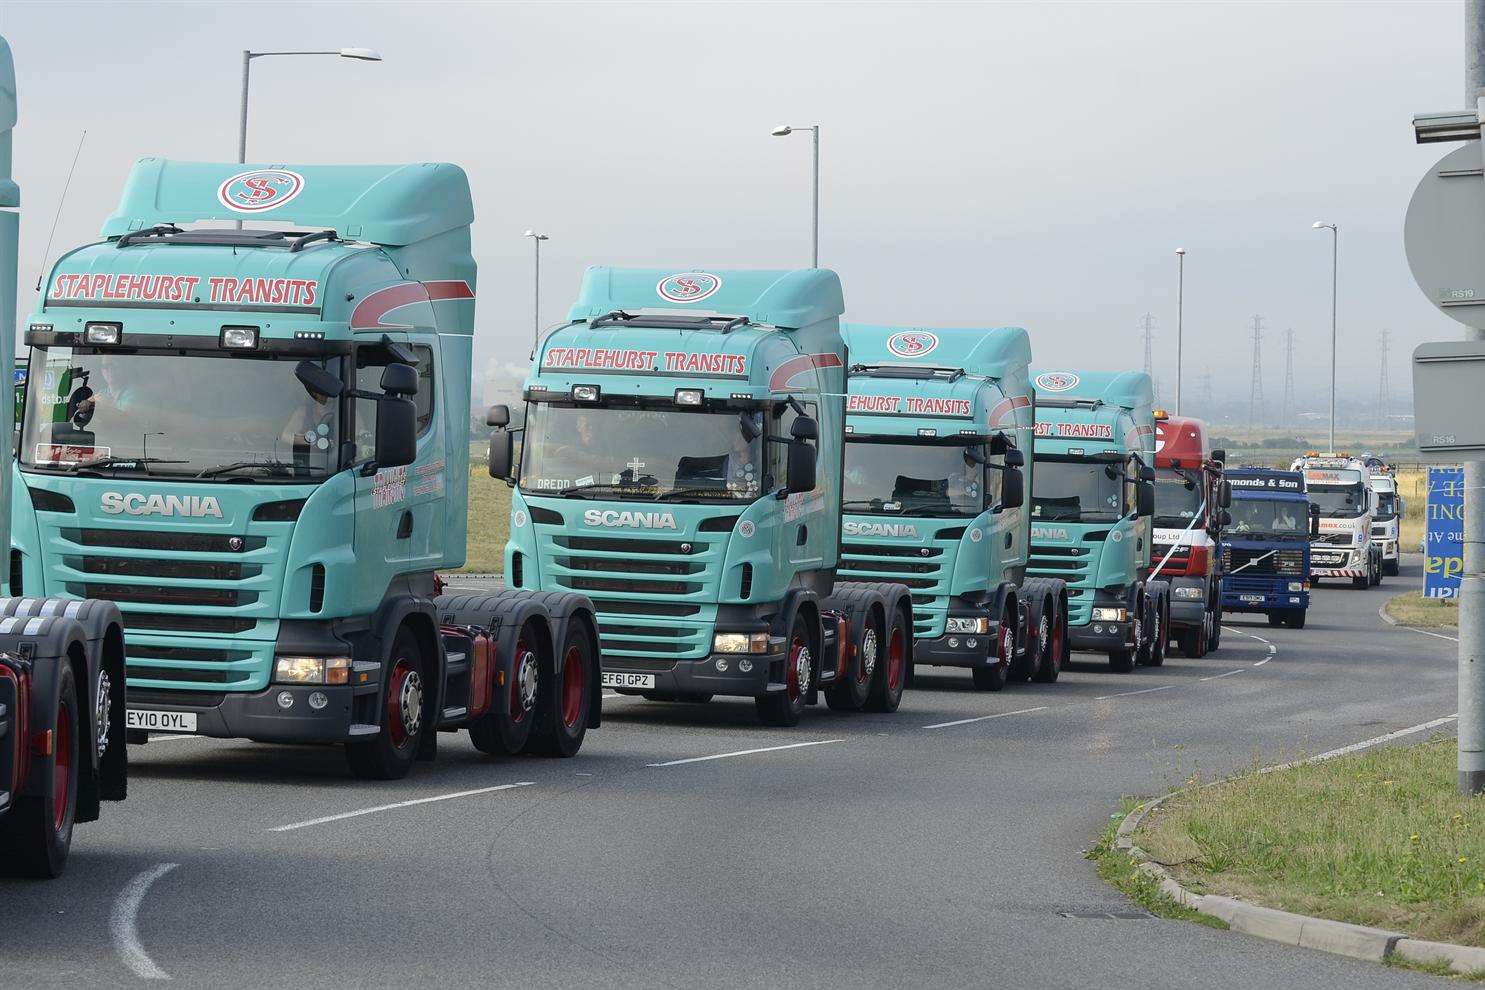 The convoy taking part in the Oliver Smith Truck Rally